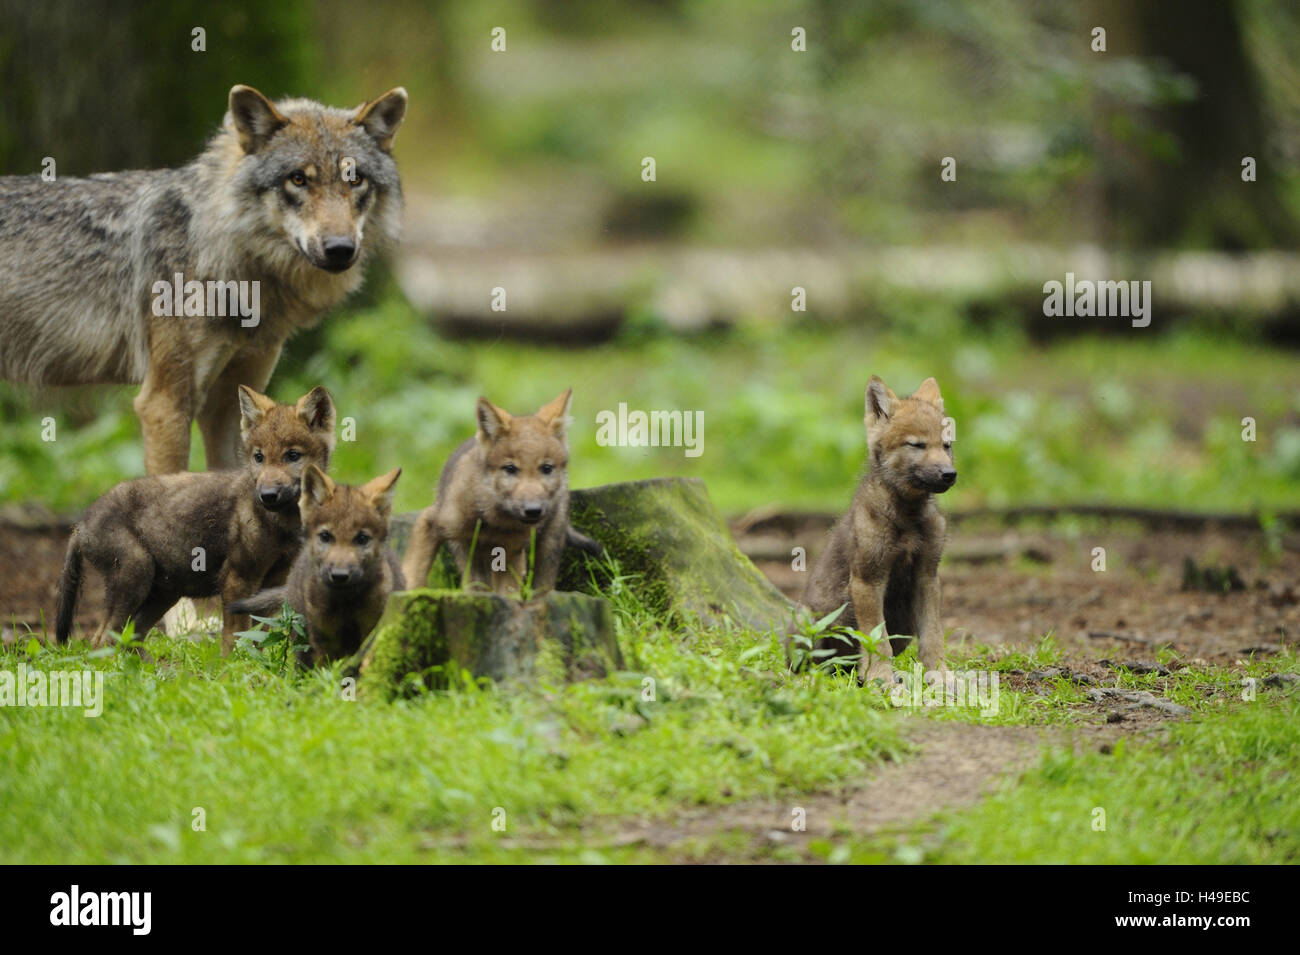 Le loup, Canis lupus, le loup, femelle chiots, looking at camera, Banque D'Images